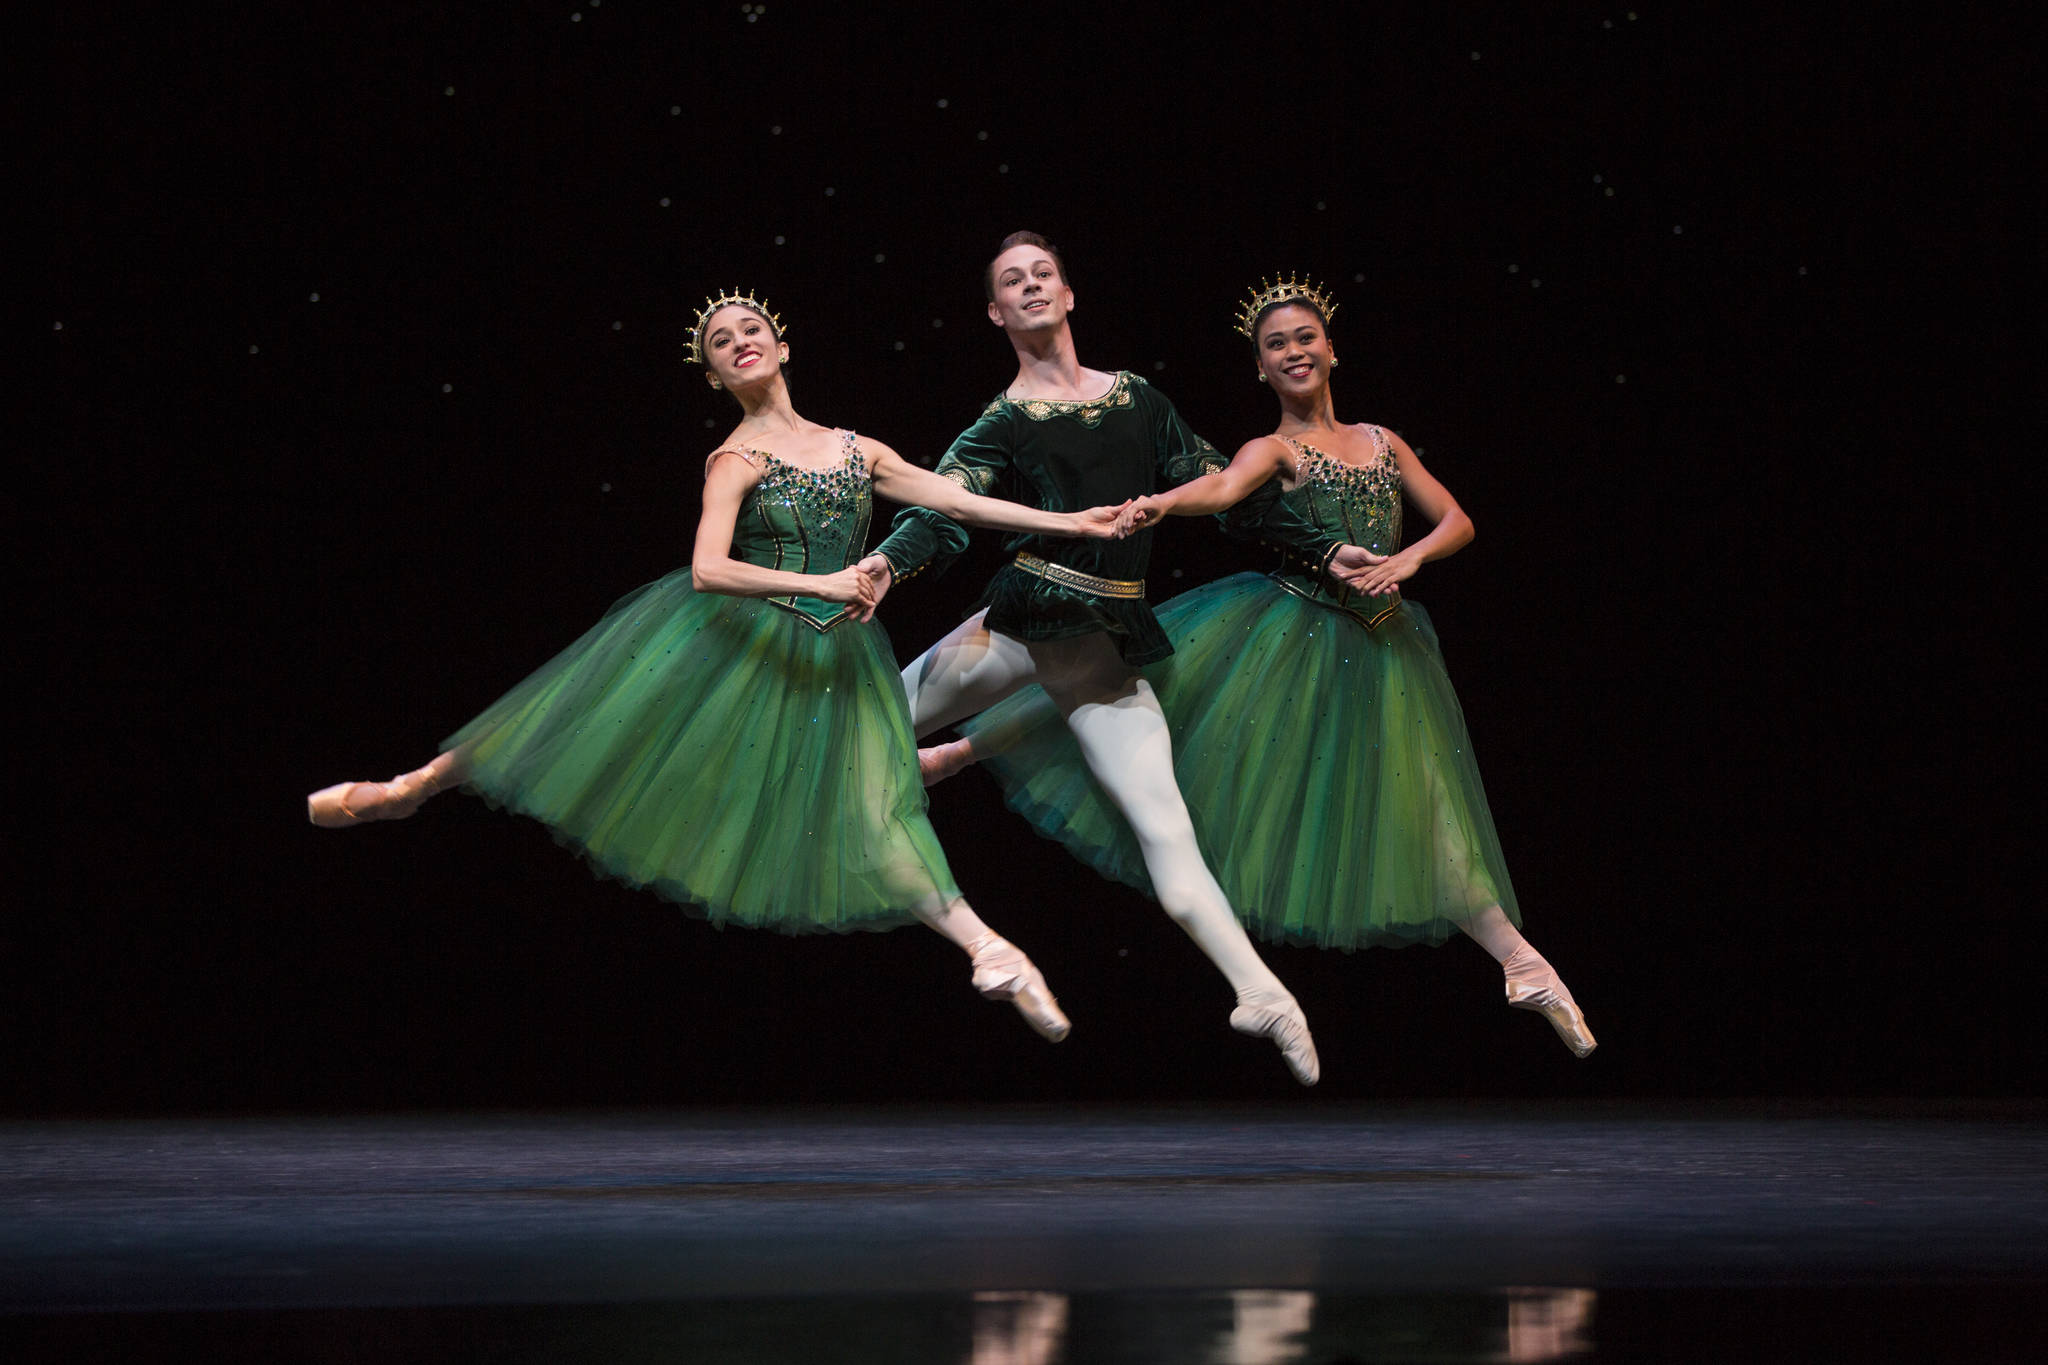 Pacific Northwest Ballet soloists Leta Biasucci, Kyle Davis, and Angelica Generosa in Emeralds from Jewels, choreography by George Balanchine. Photo by Angela Sterling